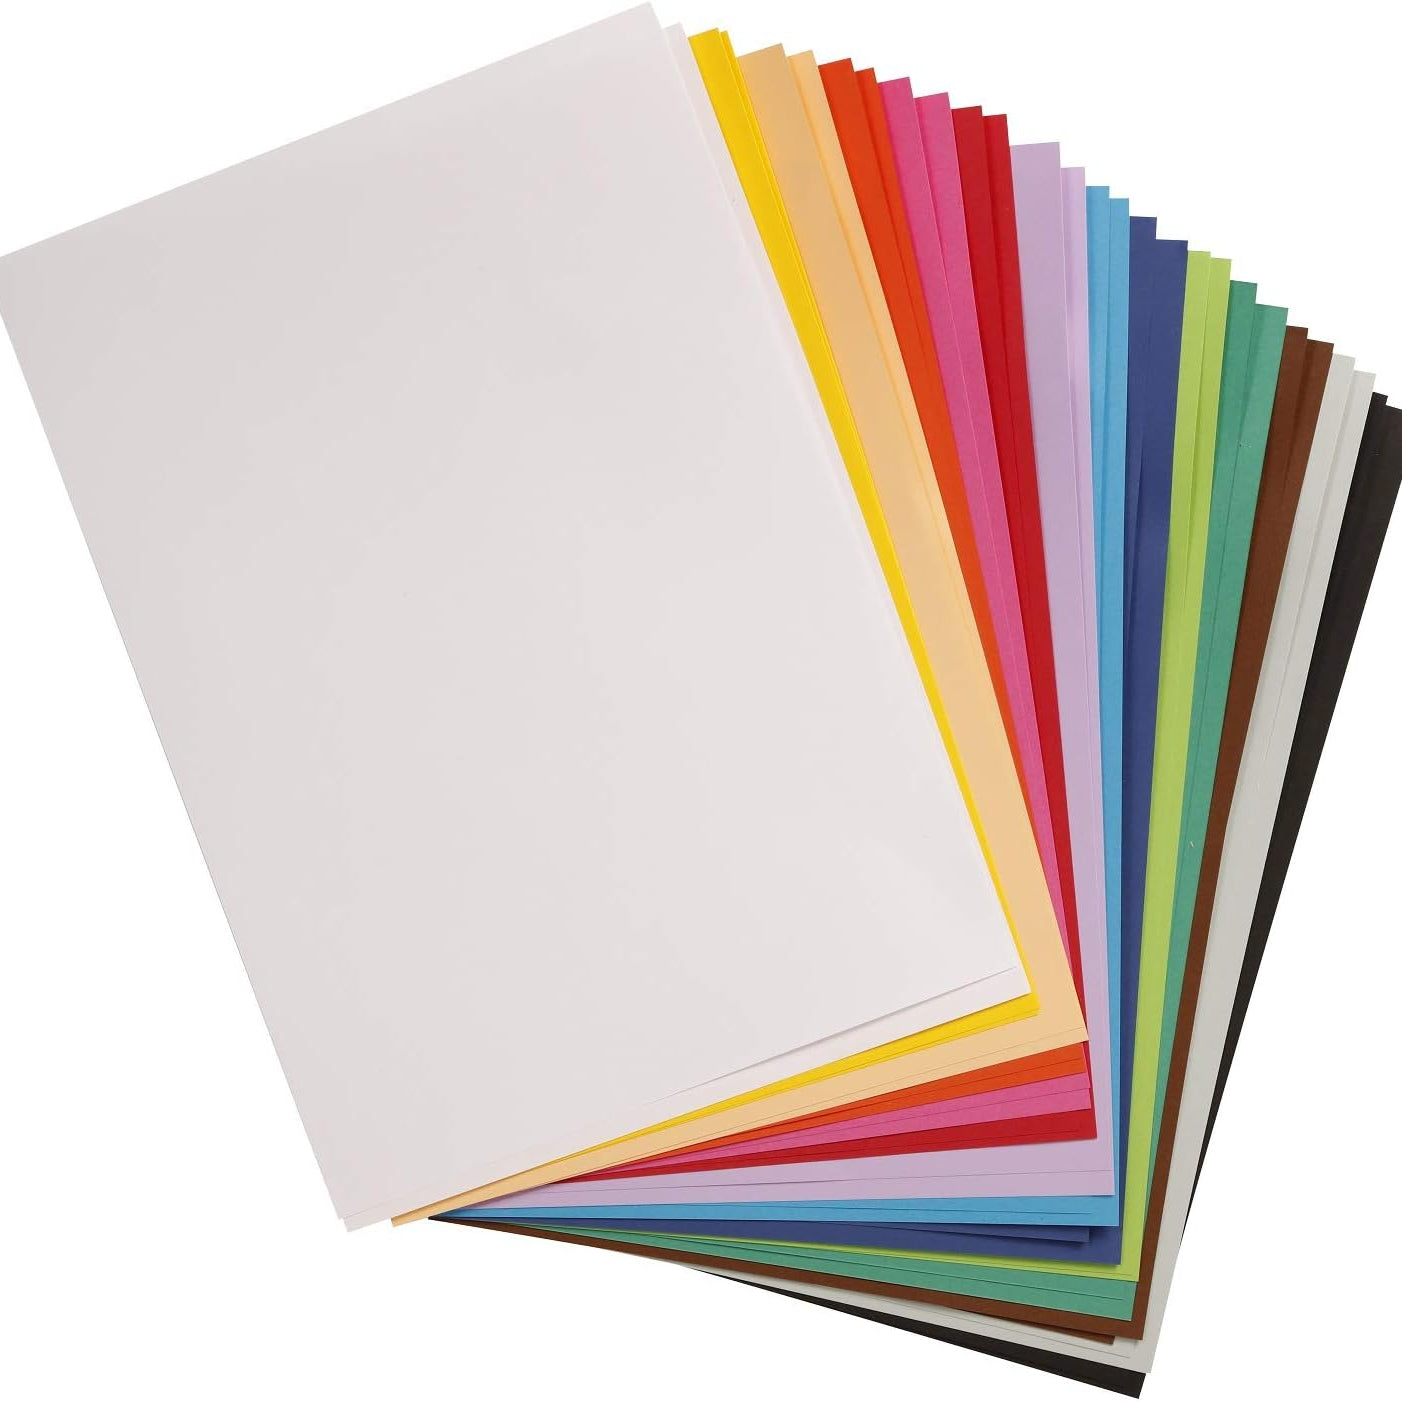 CLAIREFONTAINE Maya Coloured Paper A4 185g 25s Khaki